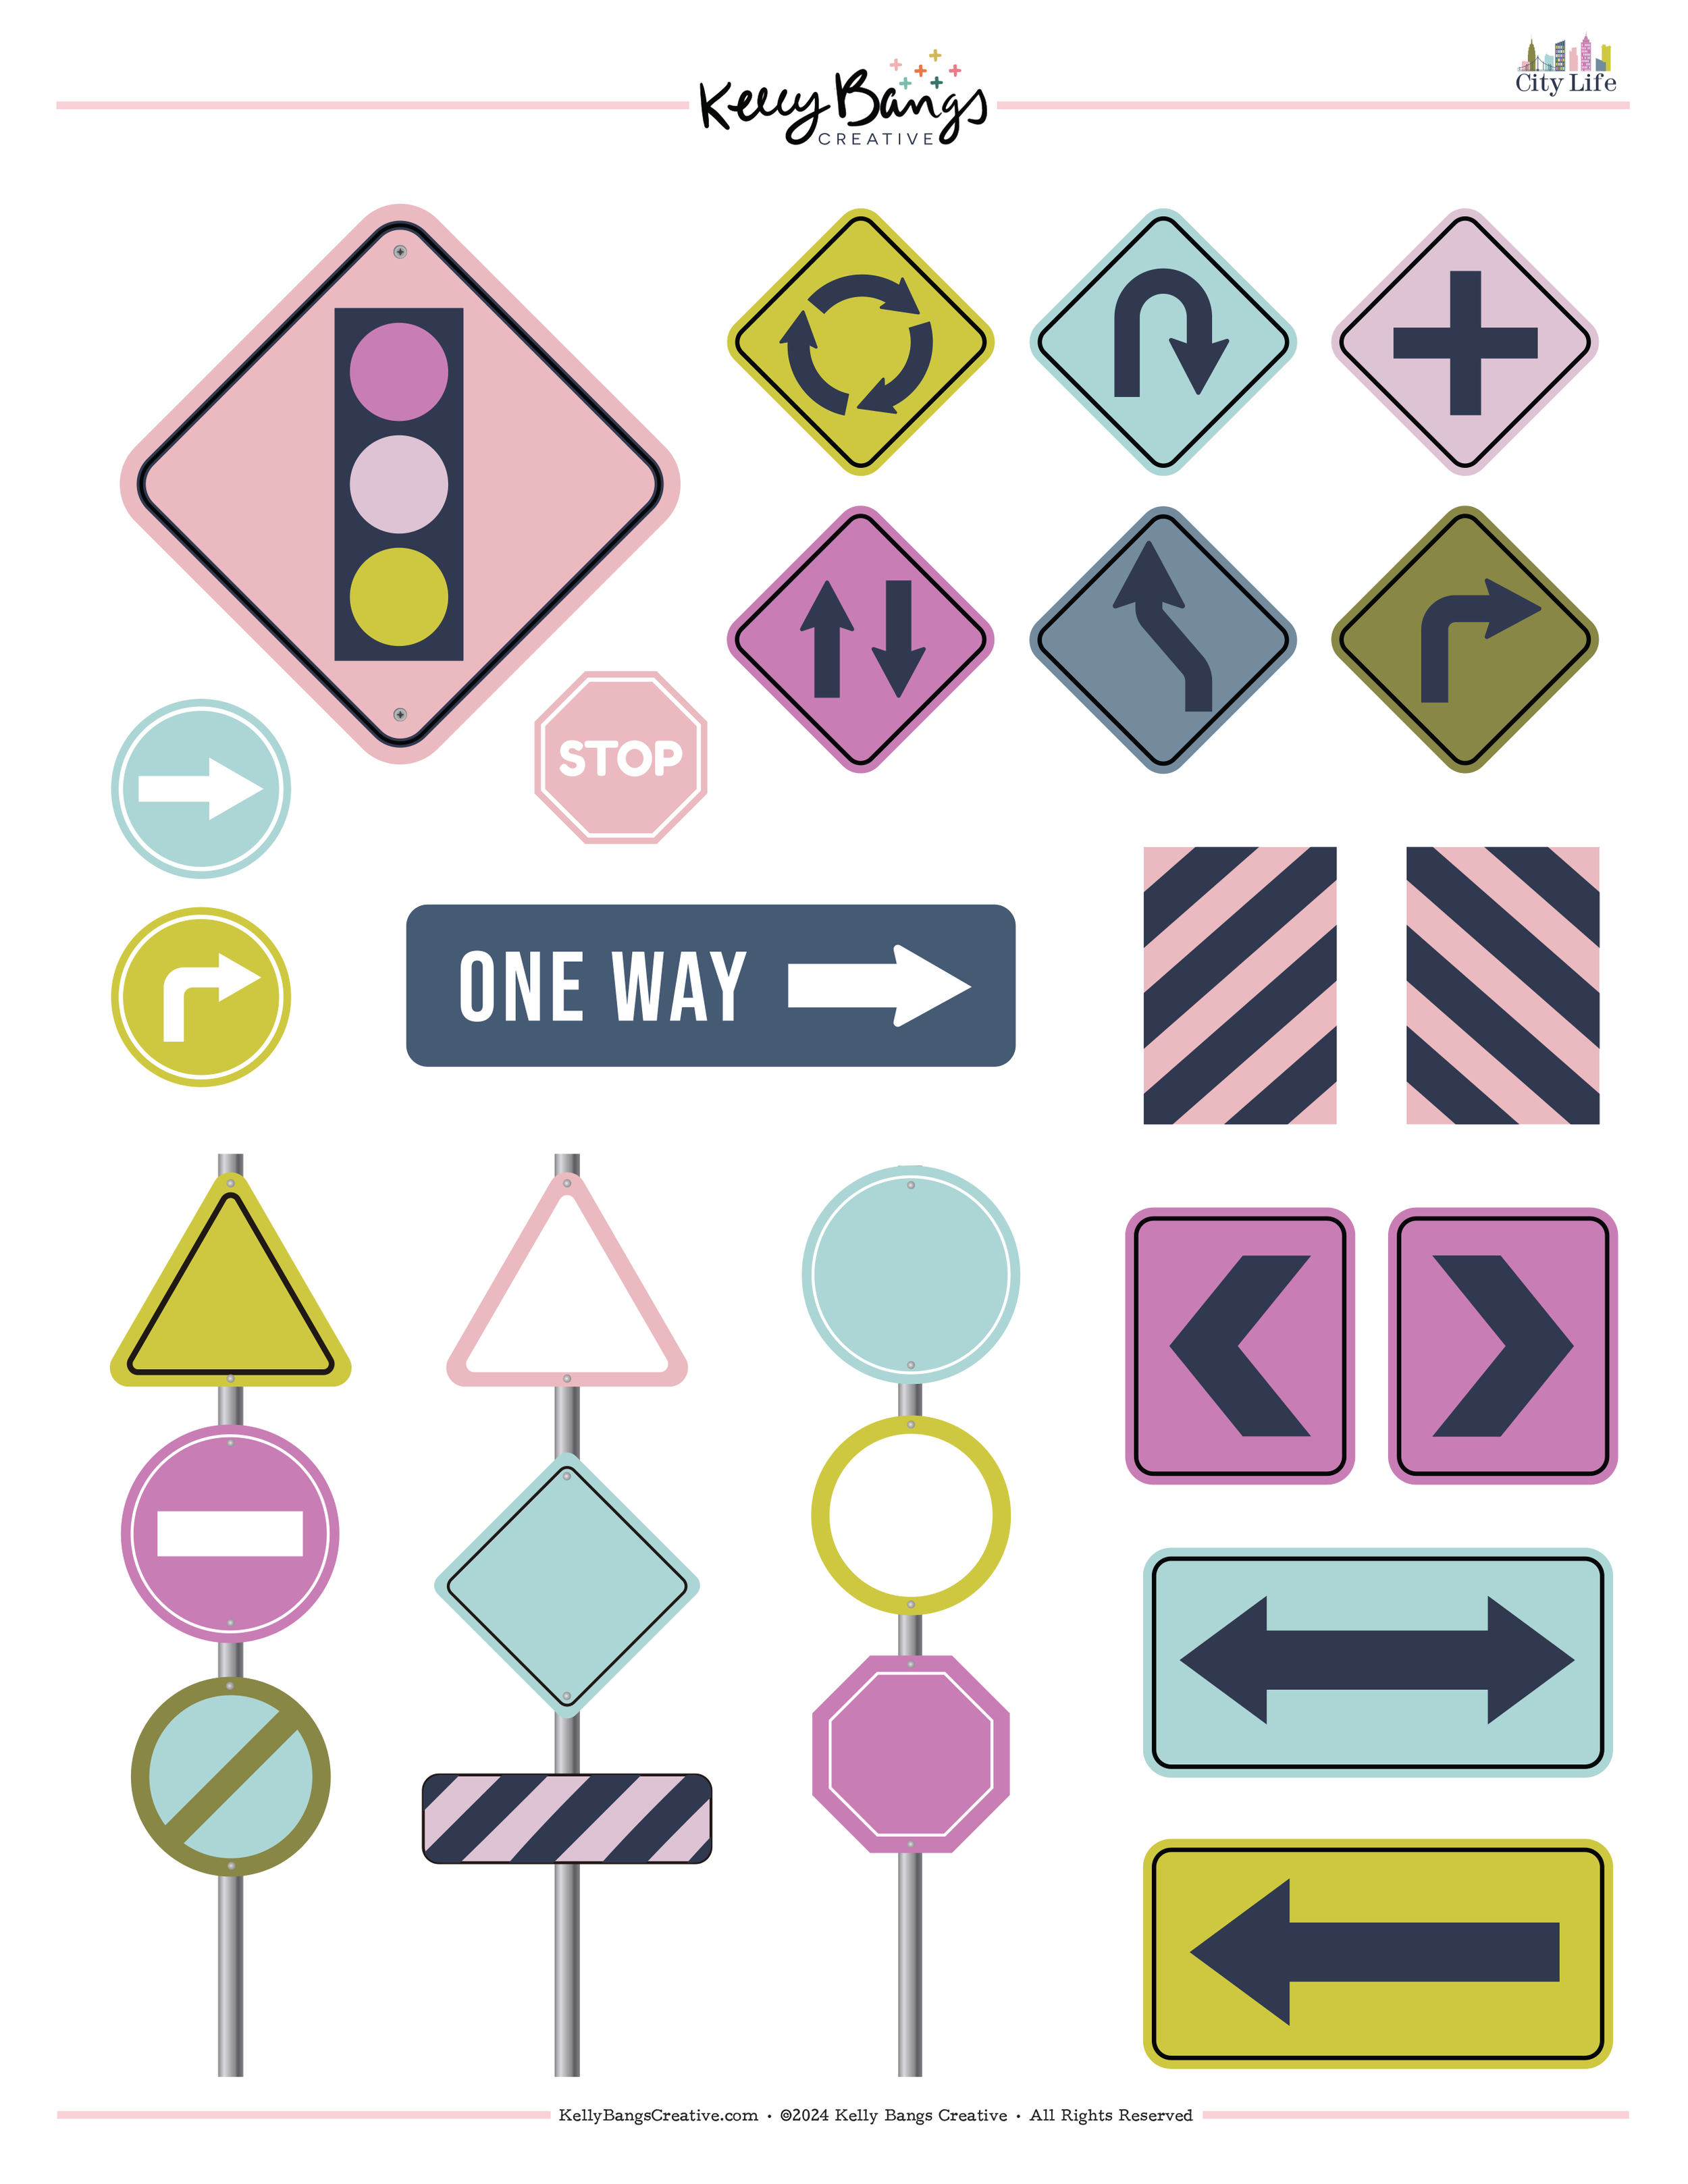 kbc-CityLife-street signs.png